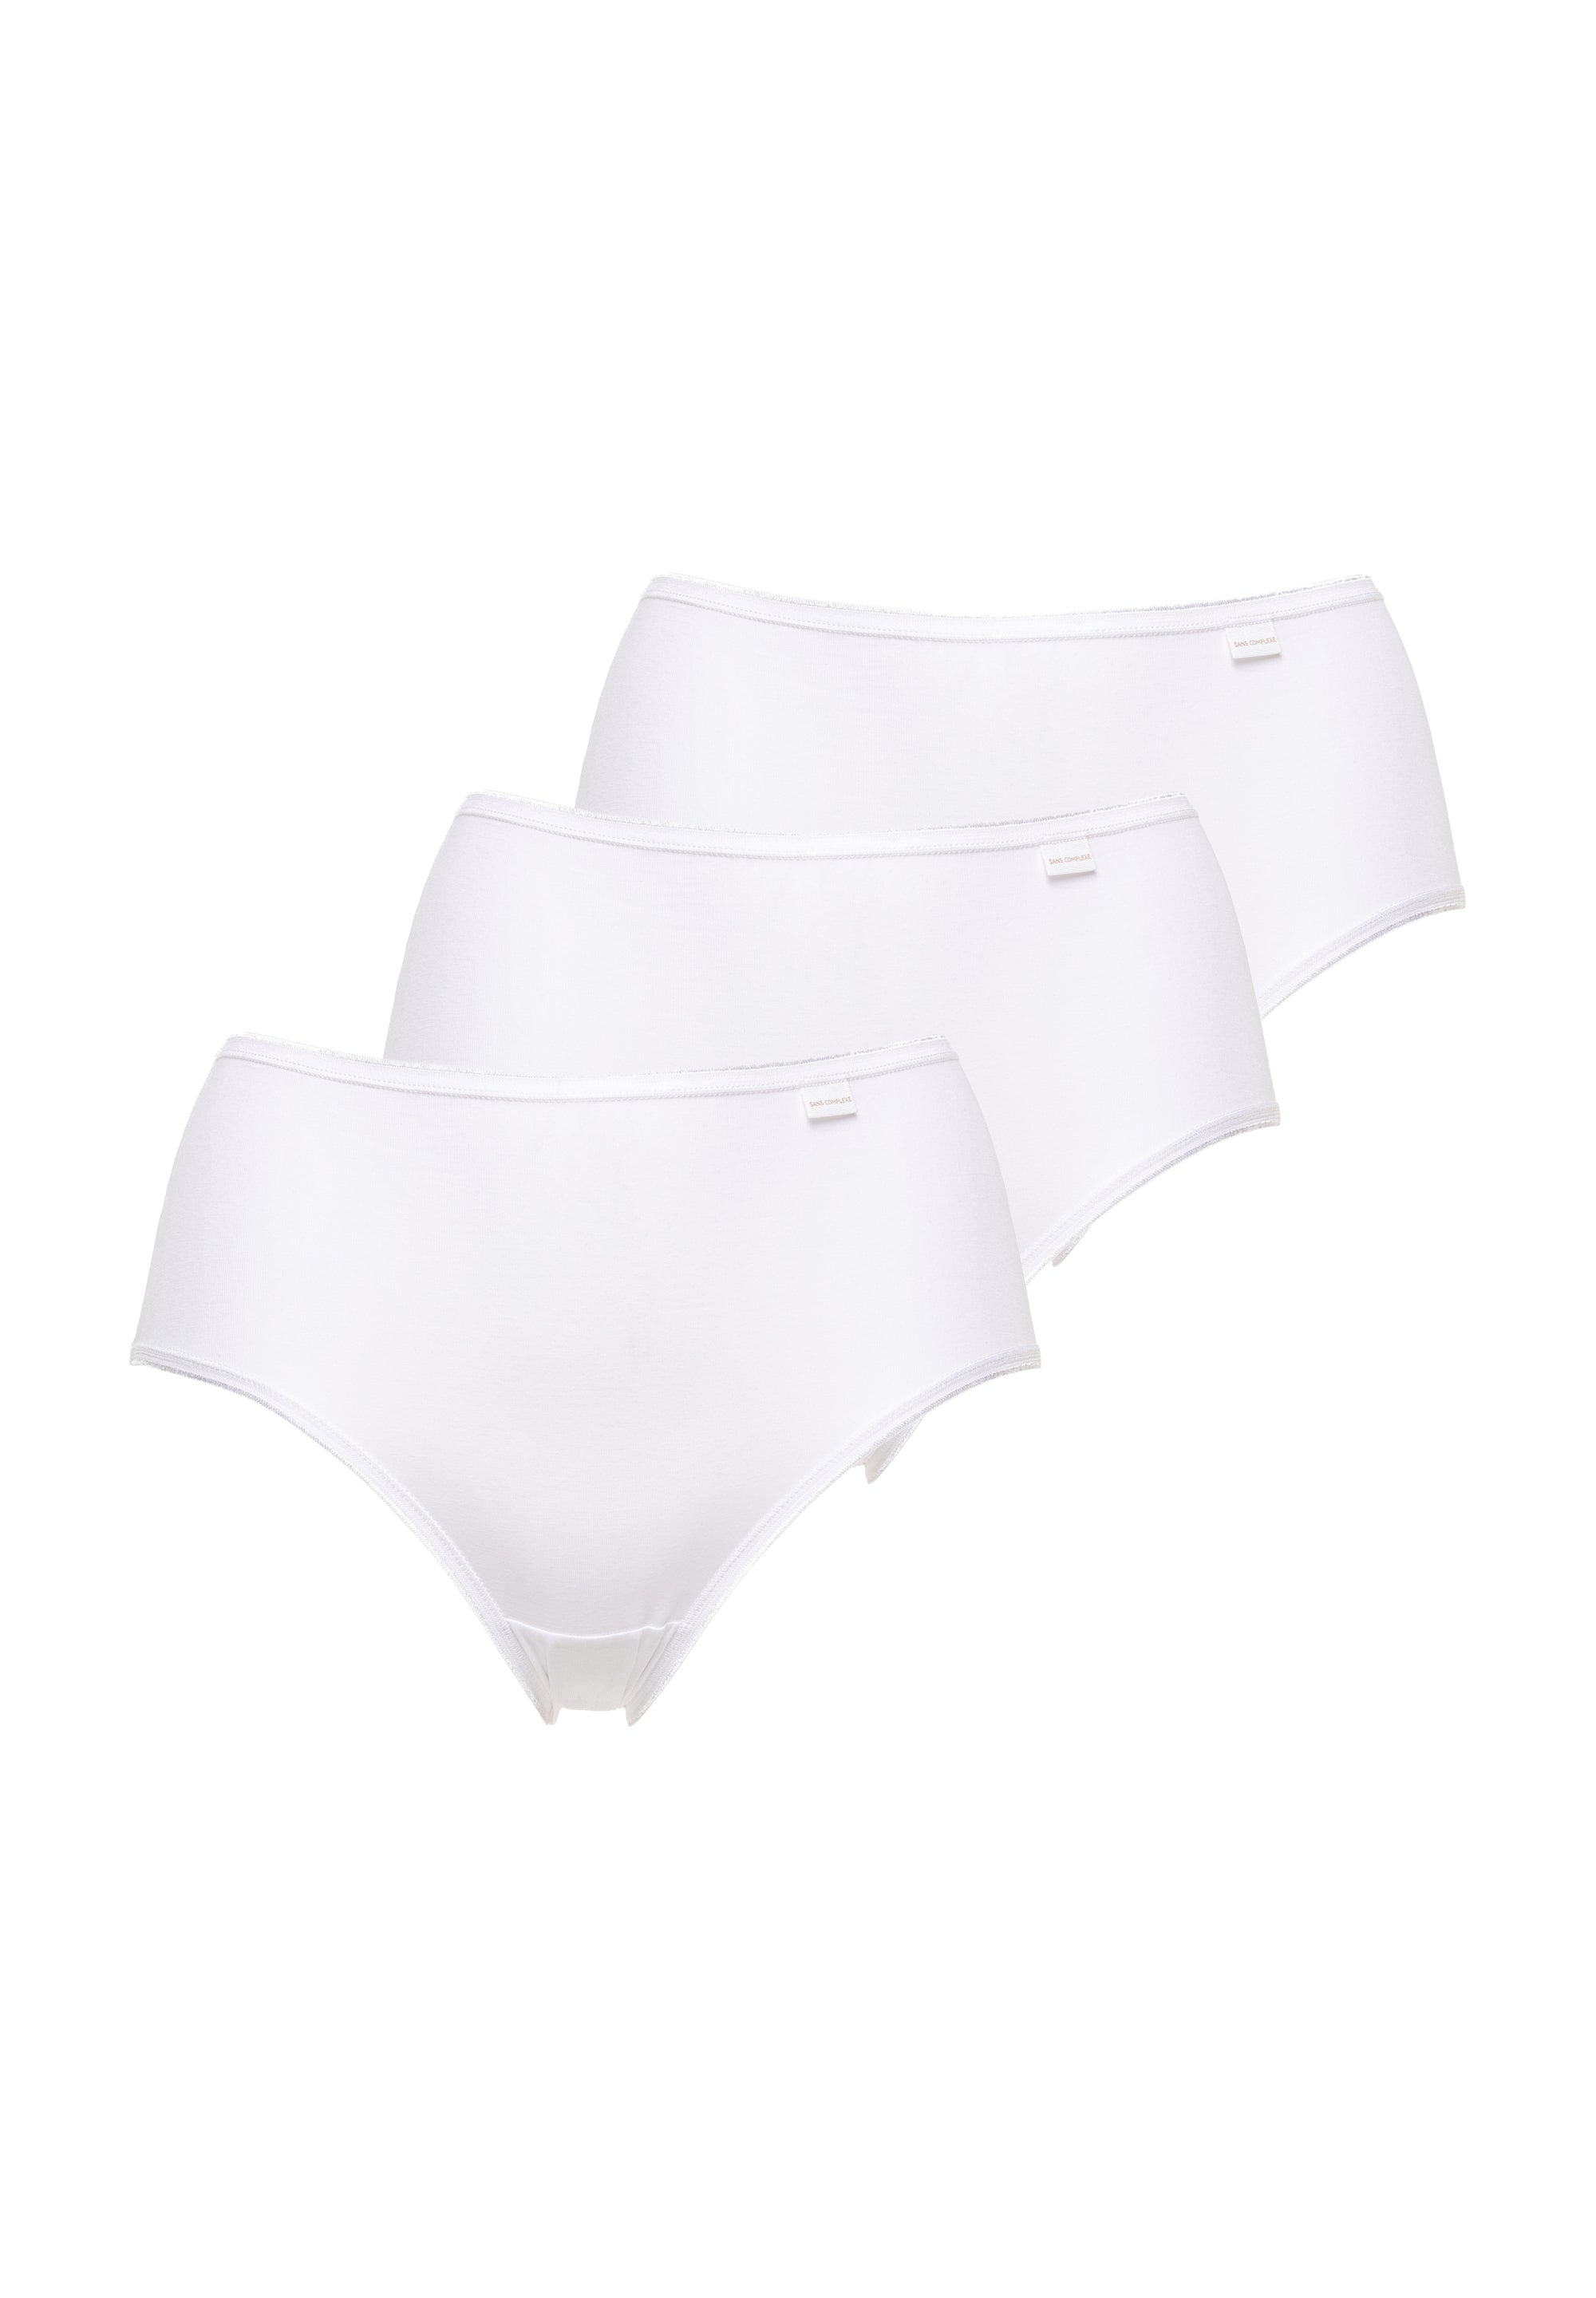 Briefs - Pack of 3 Simplement Coton B White